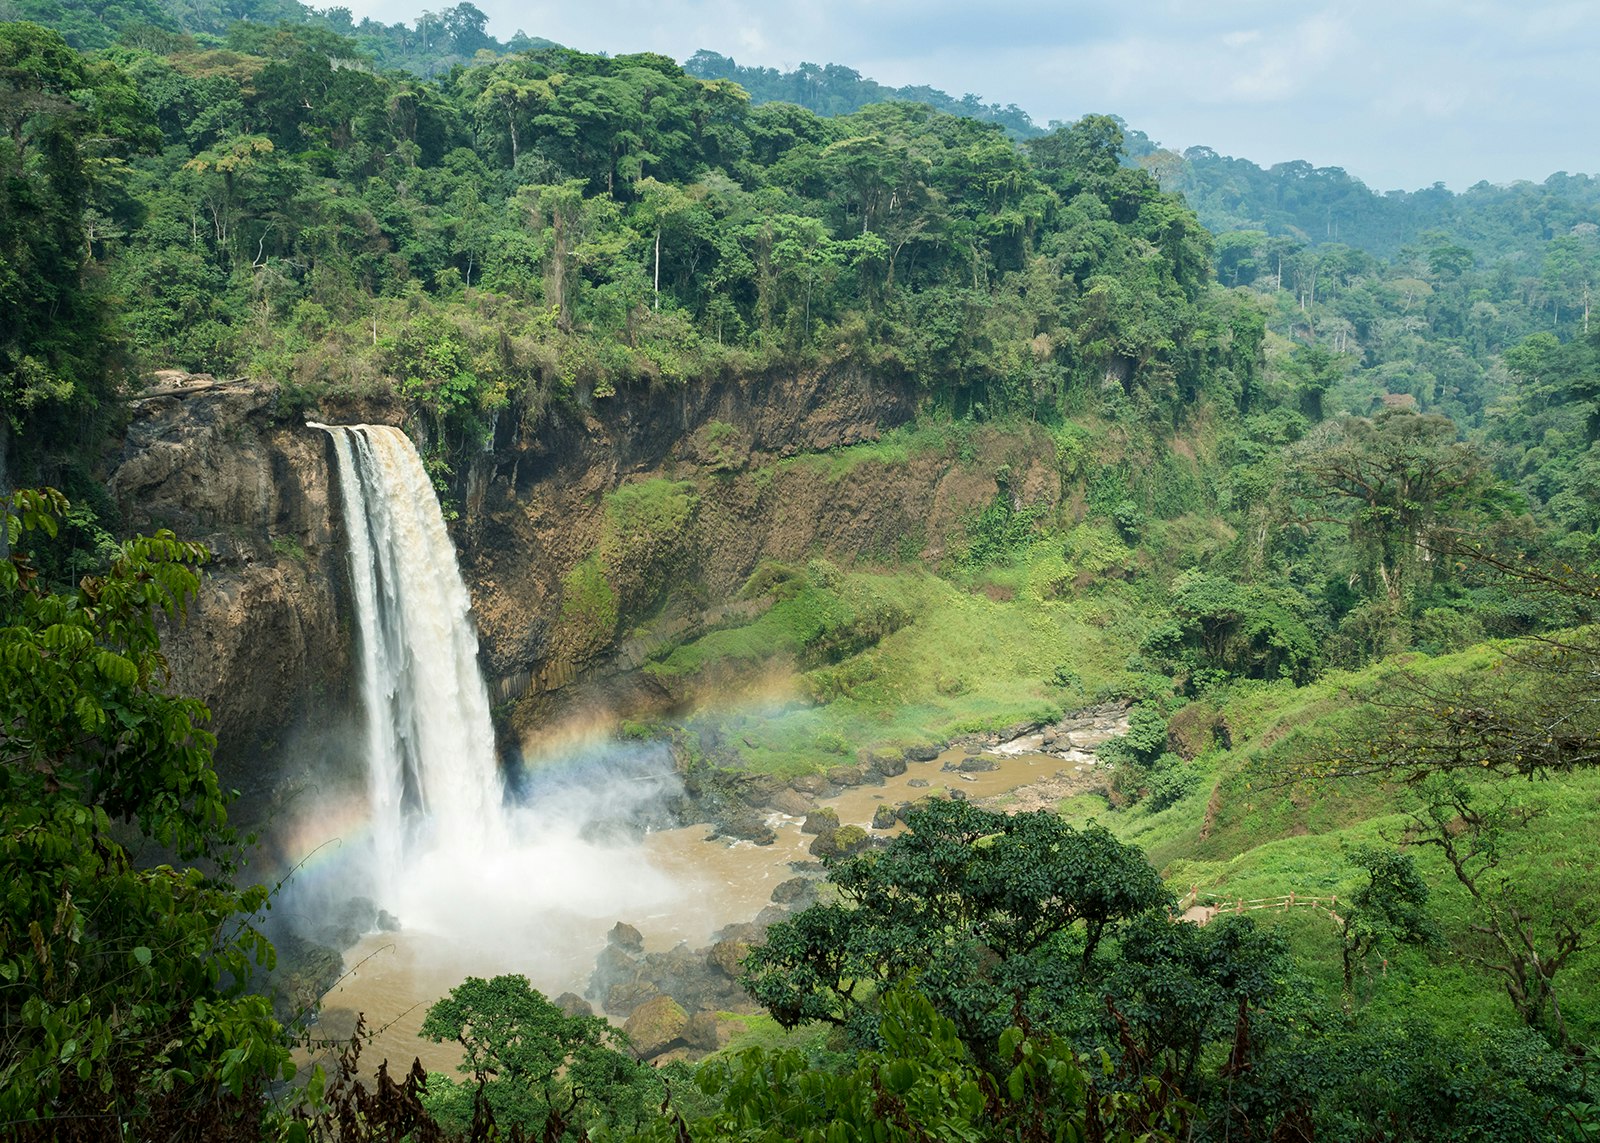 Ekom-Nkam Waterfalls in the rainforest, Melong, Cameroon, Africa © antoineed / Getty Images